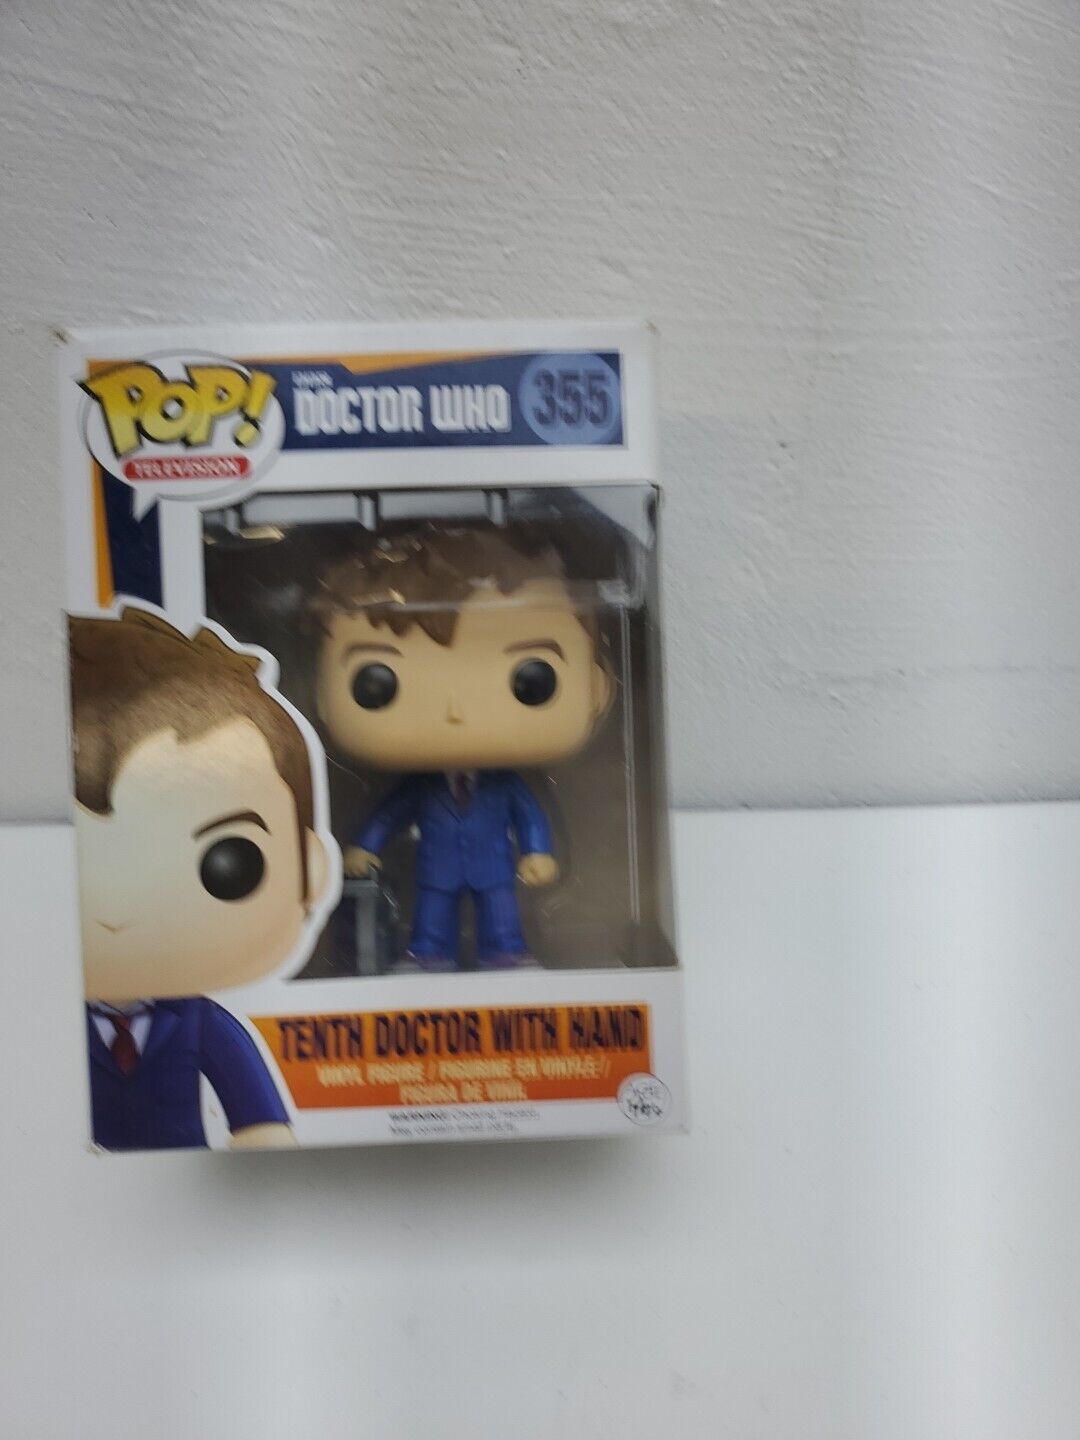 Funko Pop Television Doctor Who Tenth Doctor with Hand #355 Vinyl Figure In Box